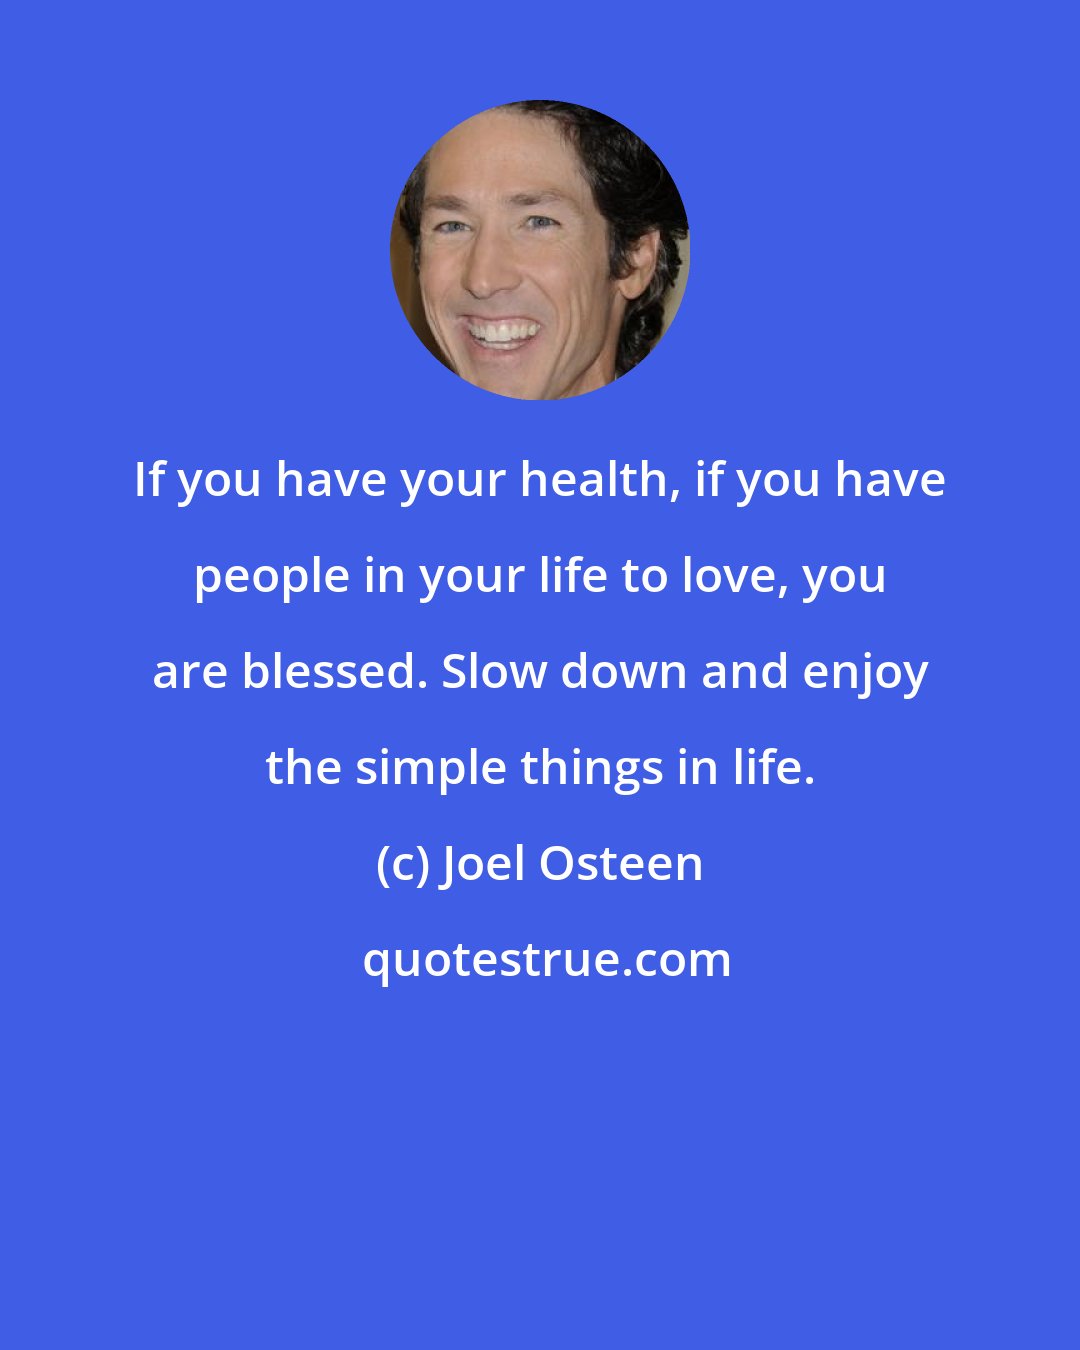 Joel Osteen: If you have your health, if you have people in your life to love, you are blessed. Slow down and enjoy the simple things in life.